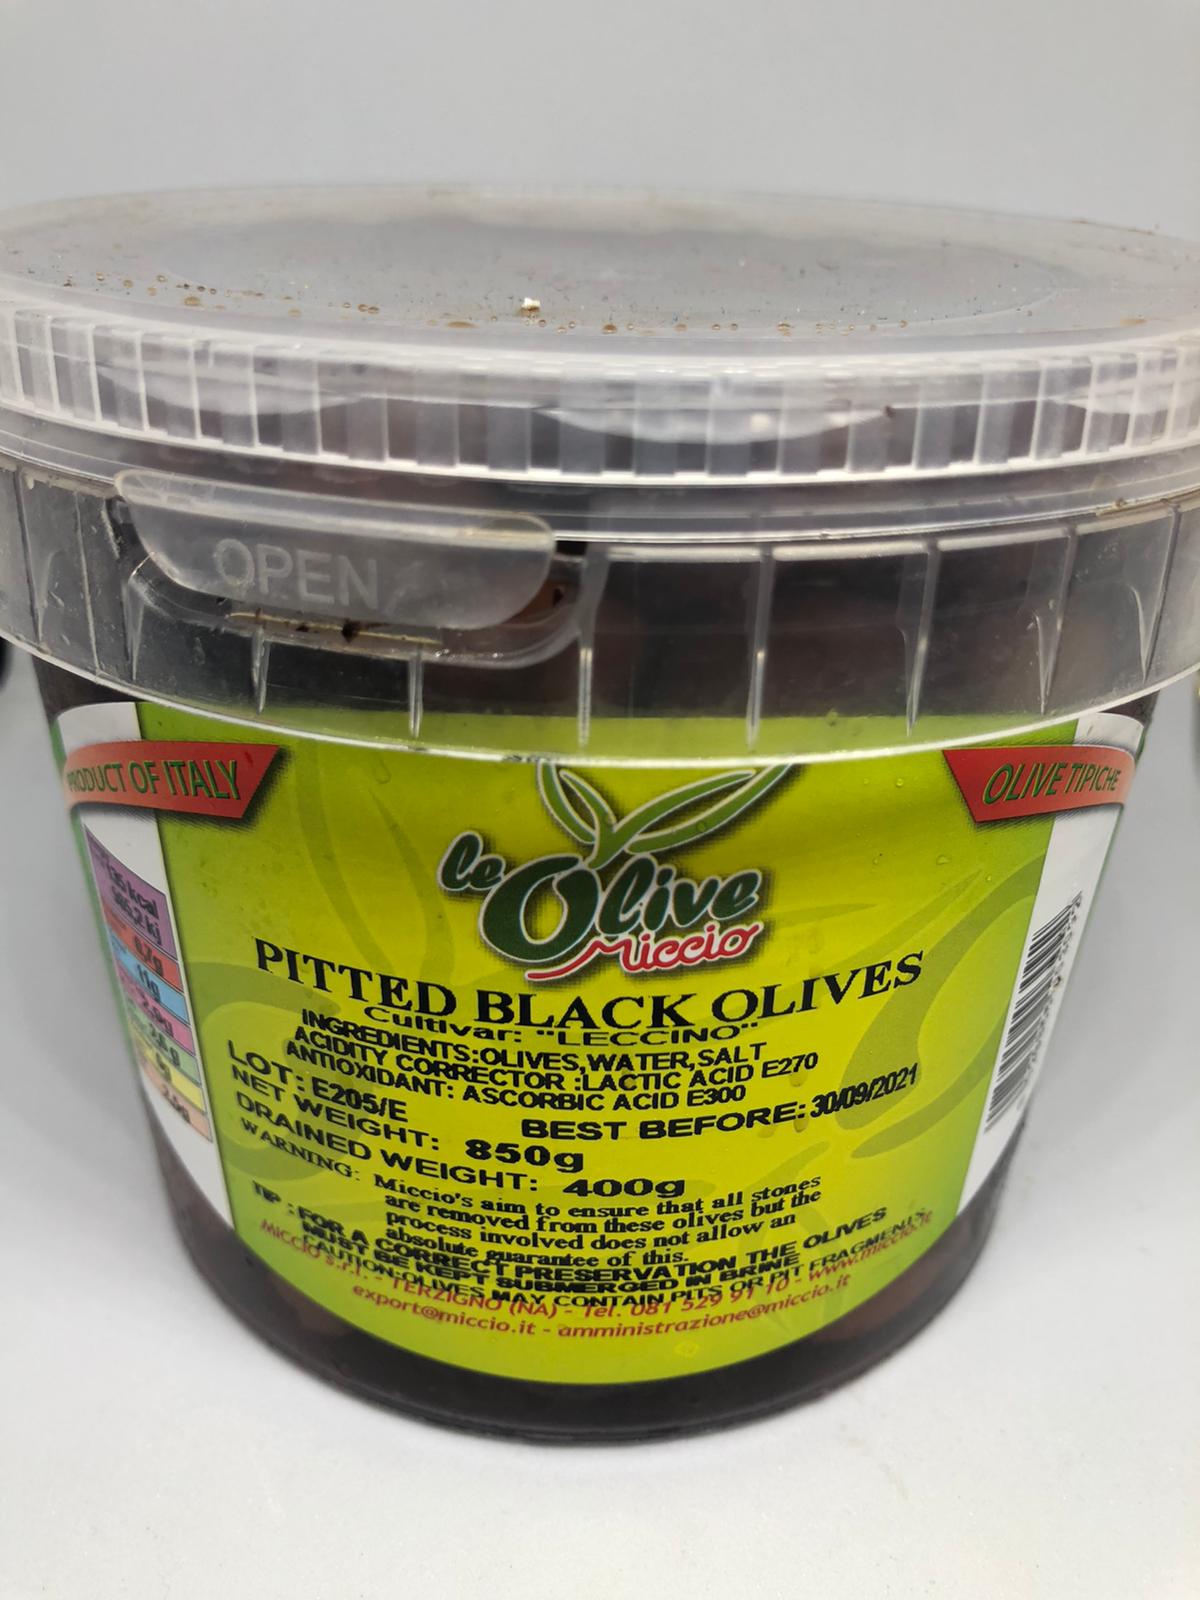 Leccino pitted black olives 400g